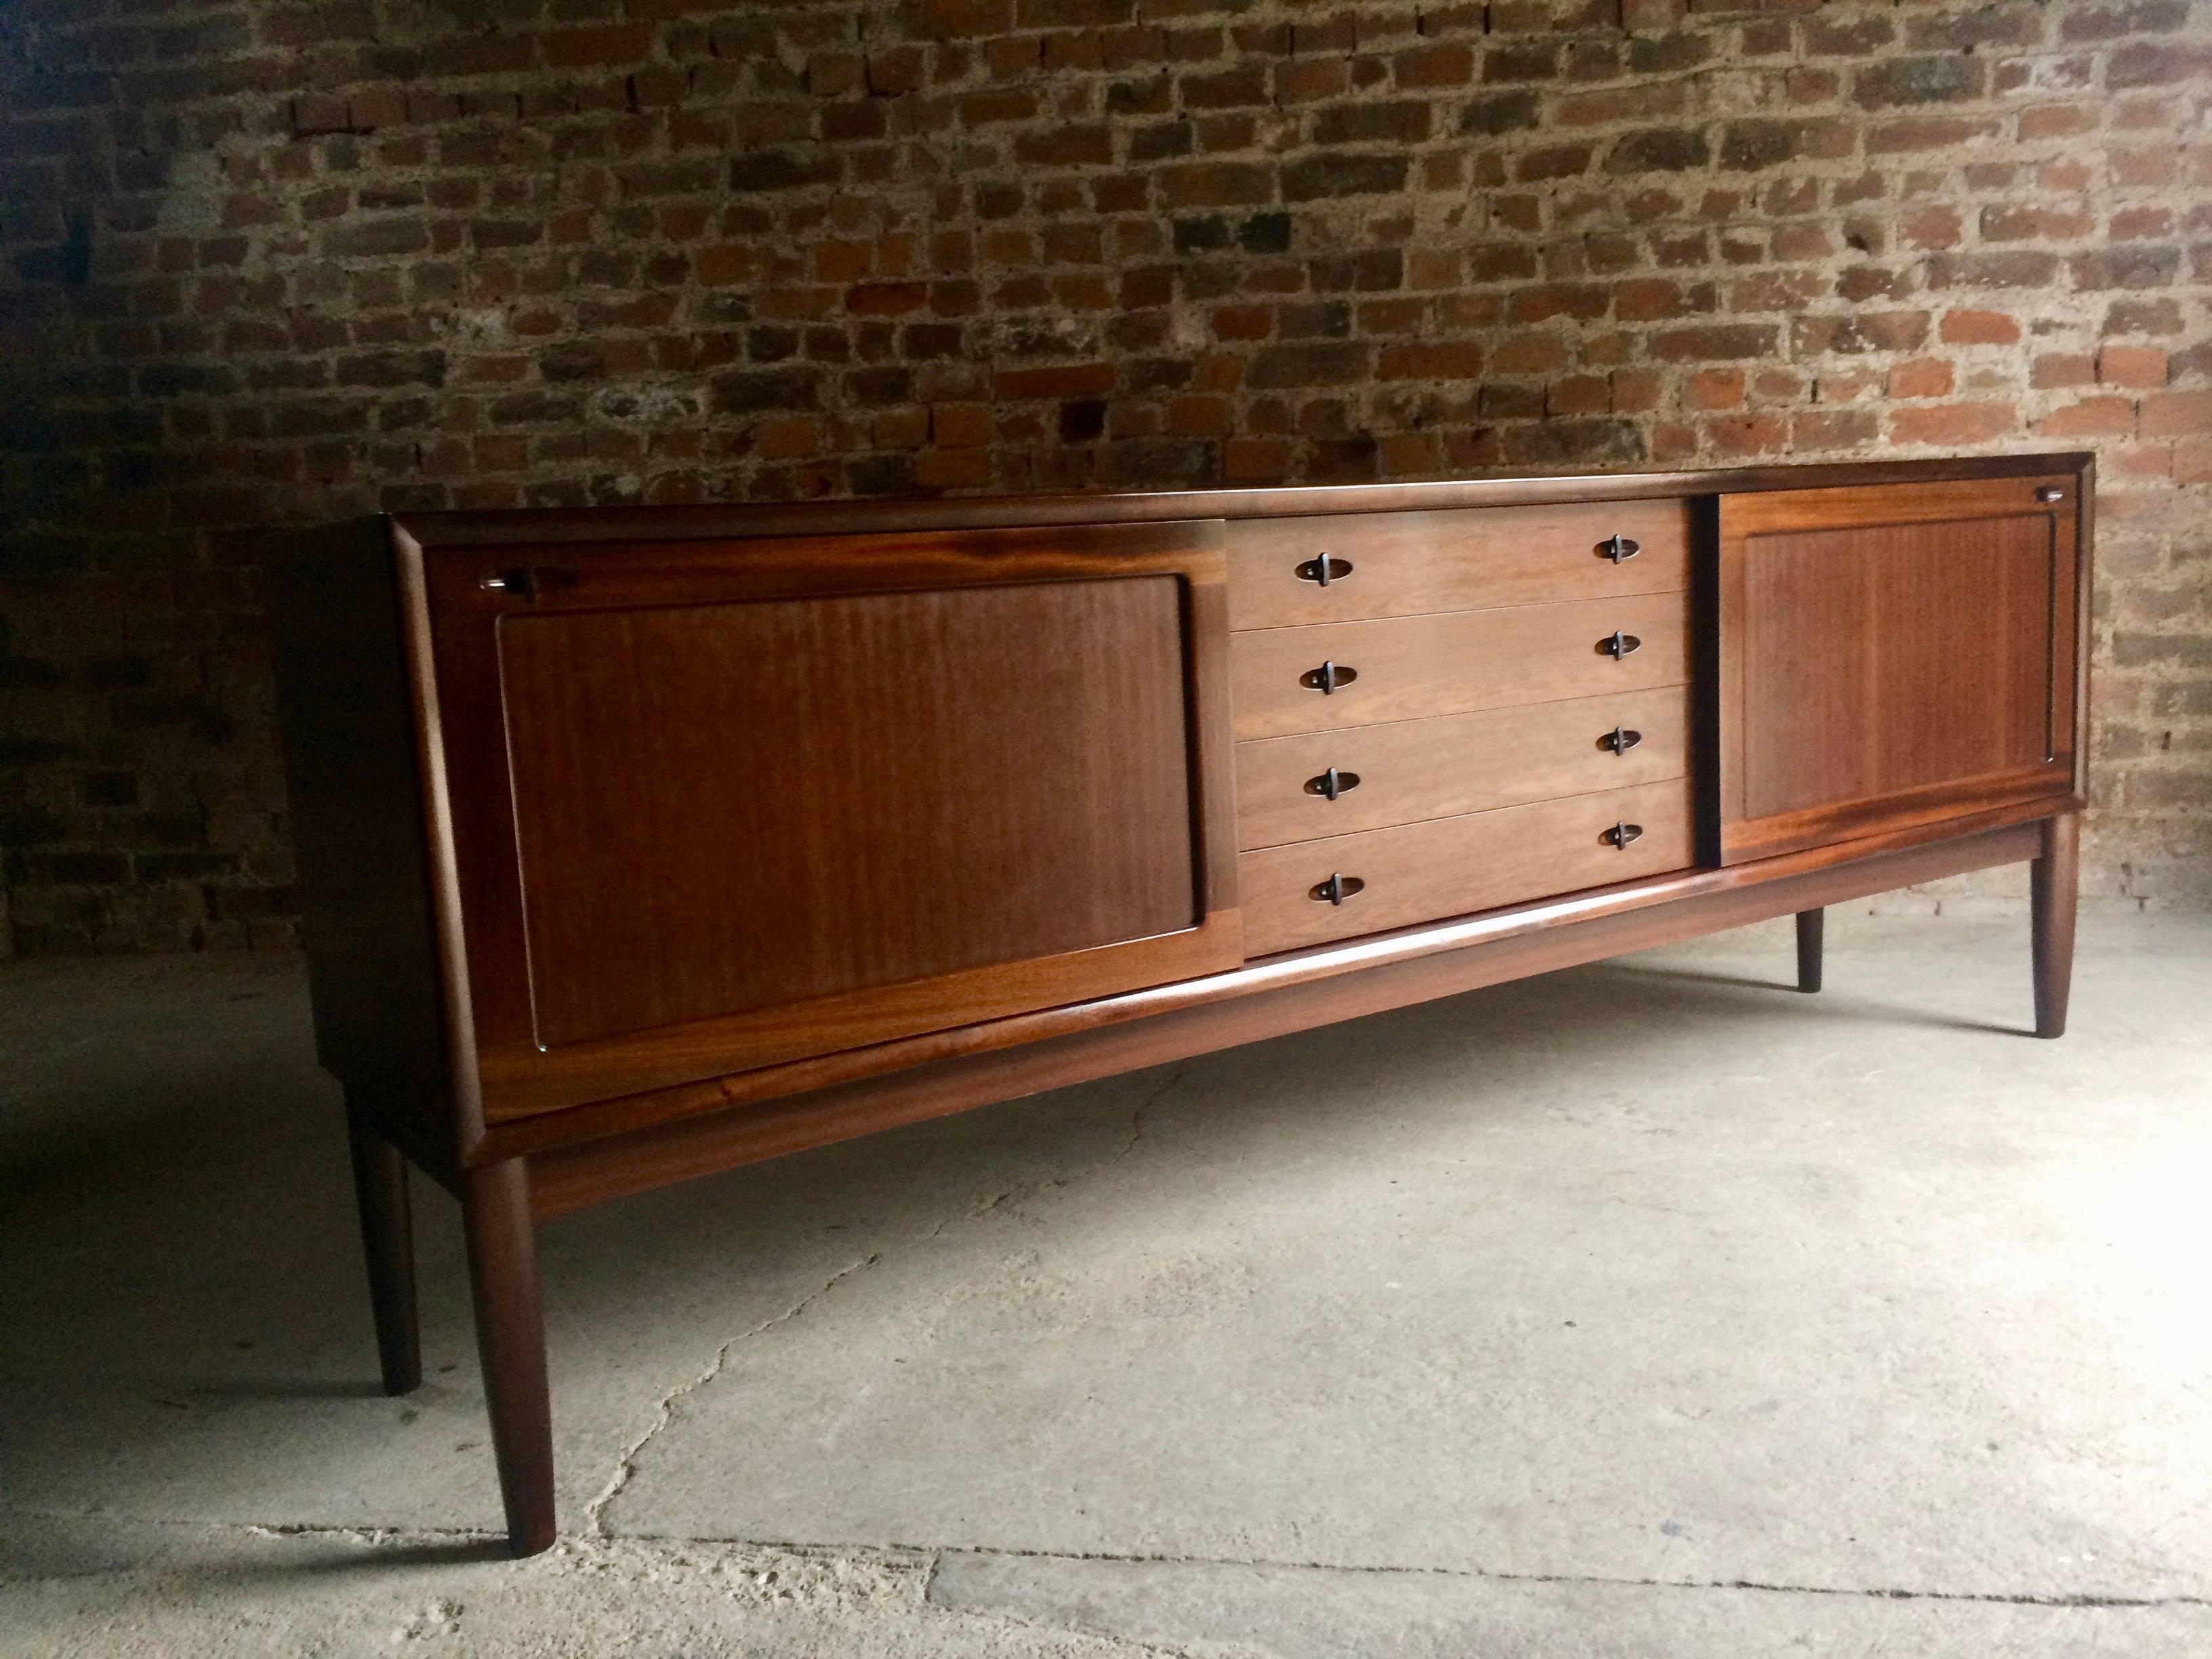 Magnificent classic Danish modern midcentury solid dark teak sideboard credenza designed by H.W. Klein and manufactured by Bramin, the rectangular top over two large sliding doors with adjustable interior shelving, flanking a flight of four central